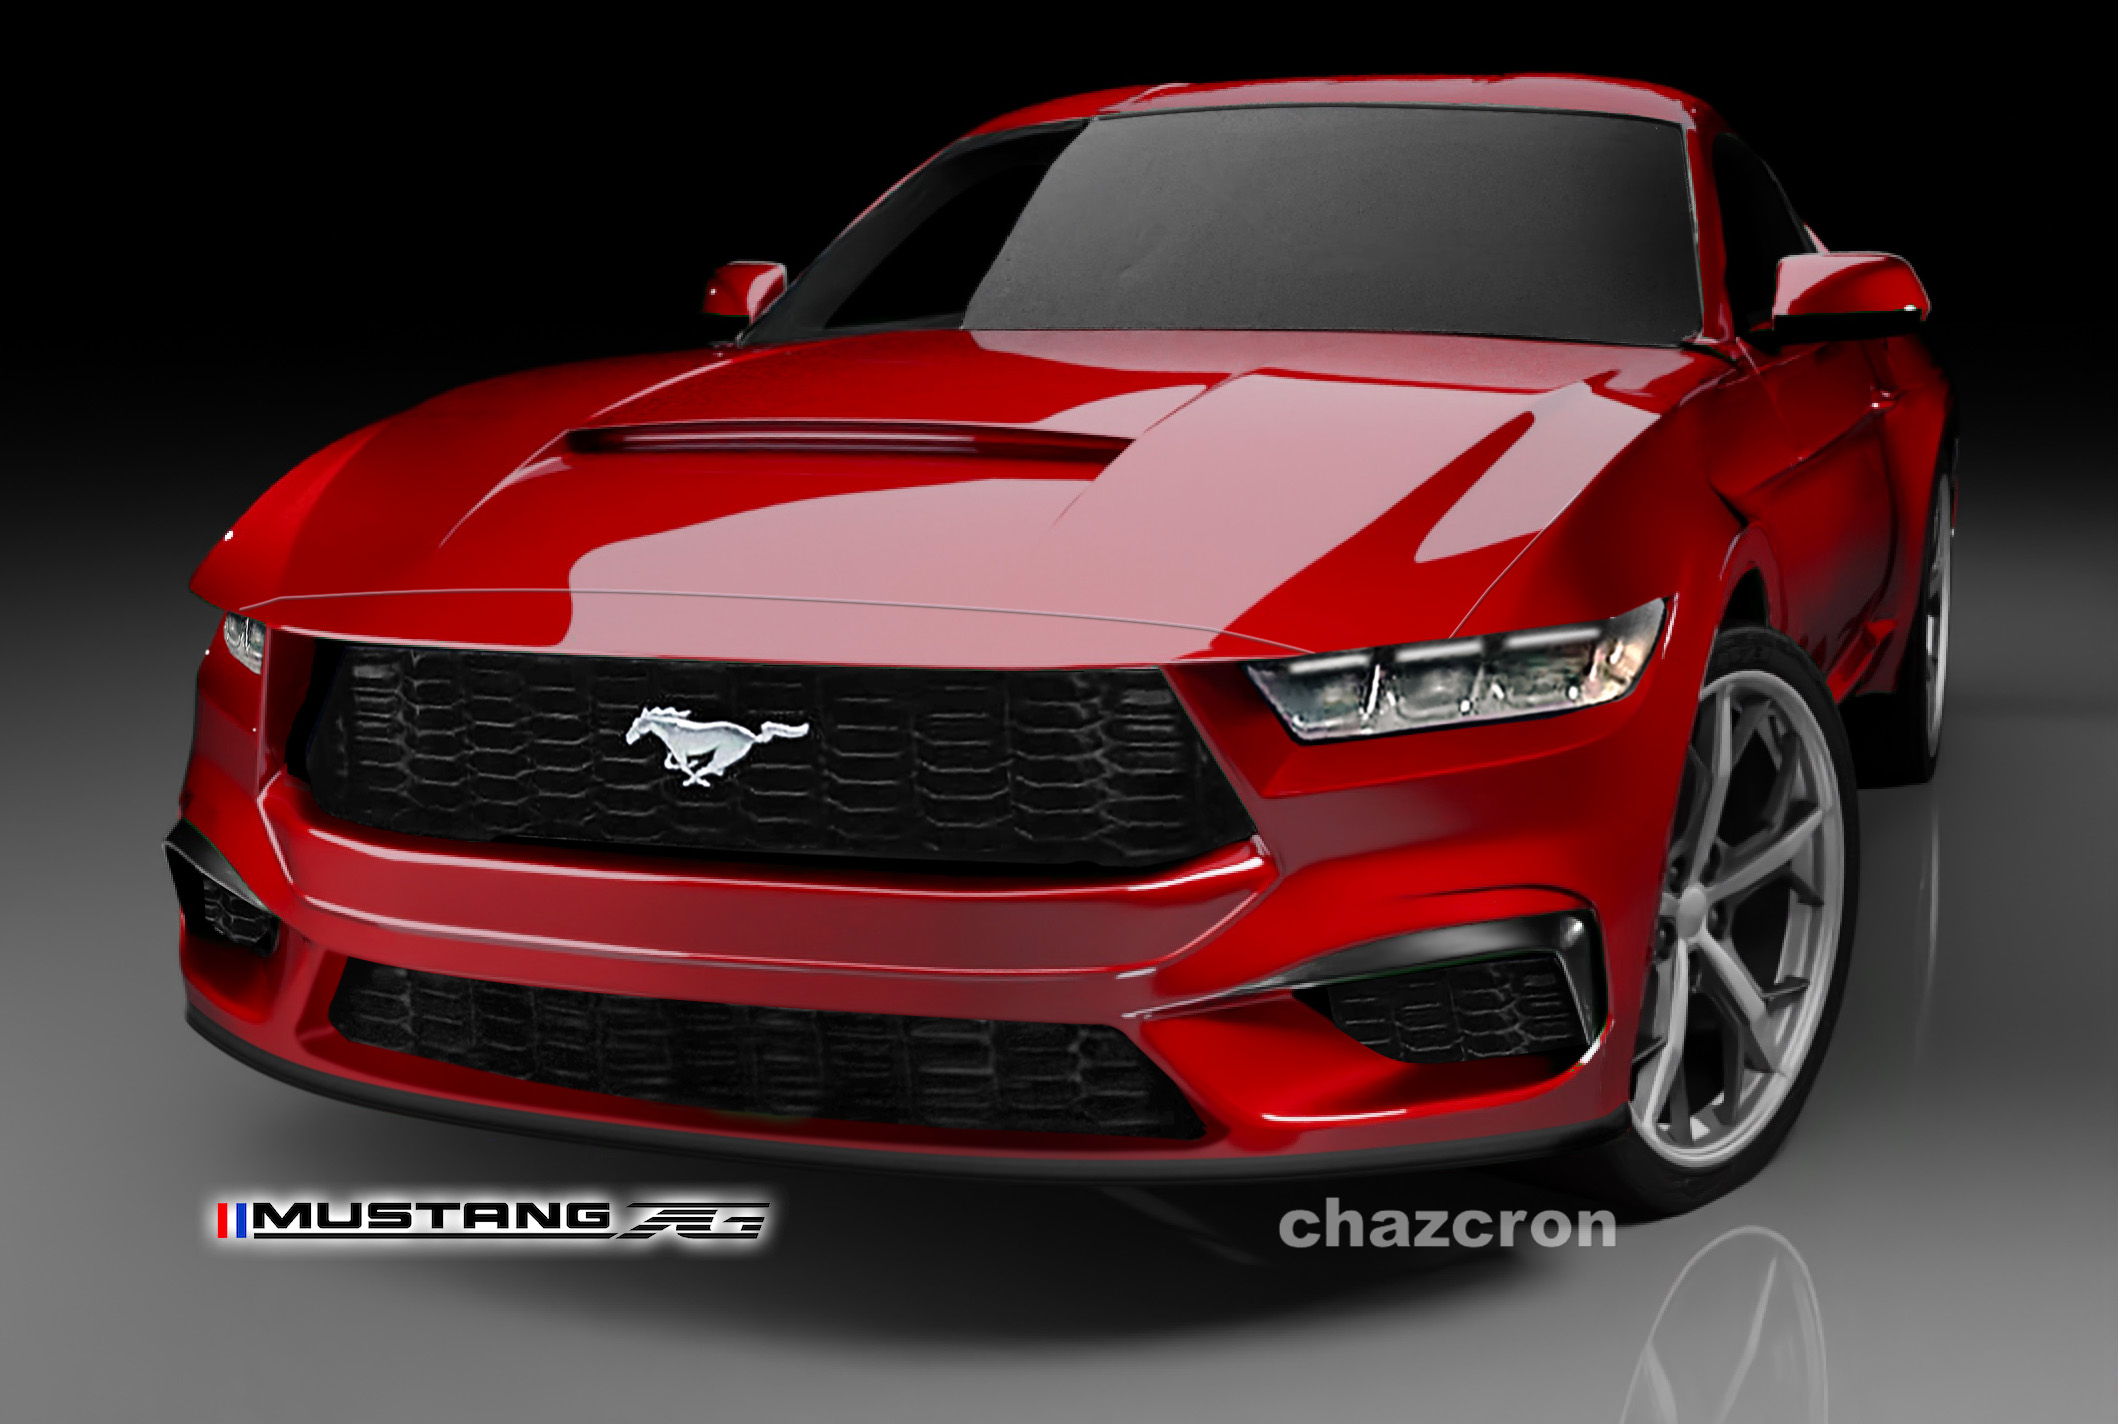 S650 Mustang chazcron weighs in... 7th gen 2023 Mustang S650 3D model & renderings in several colors! s655_rd_starter-